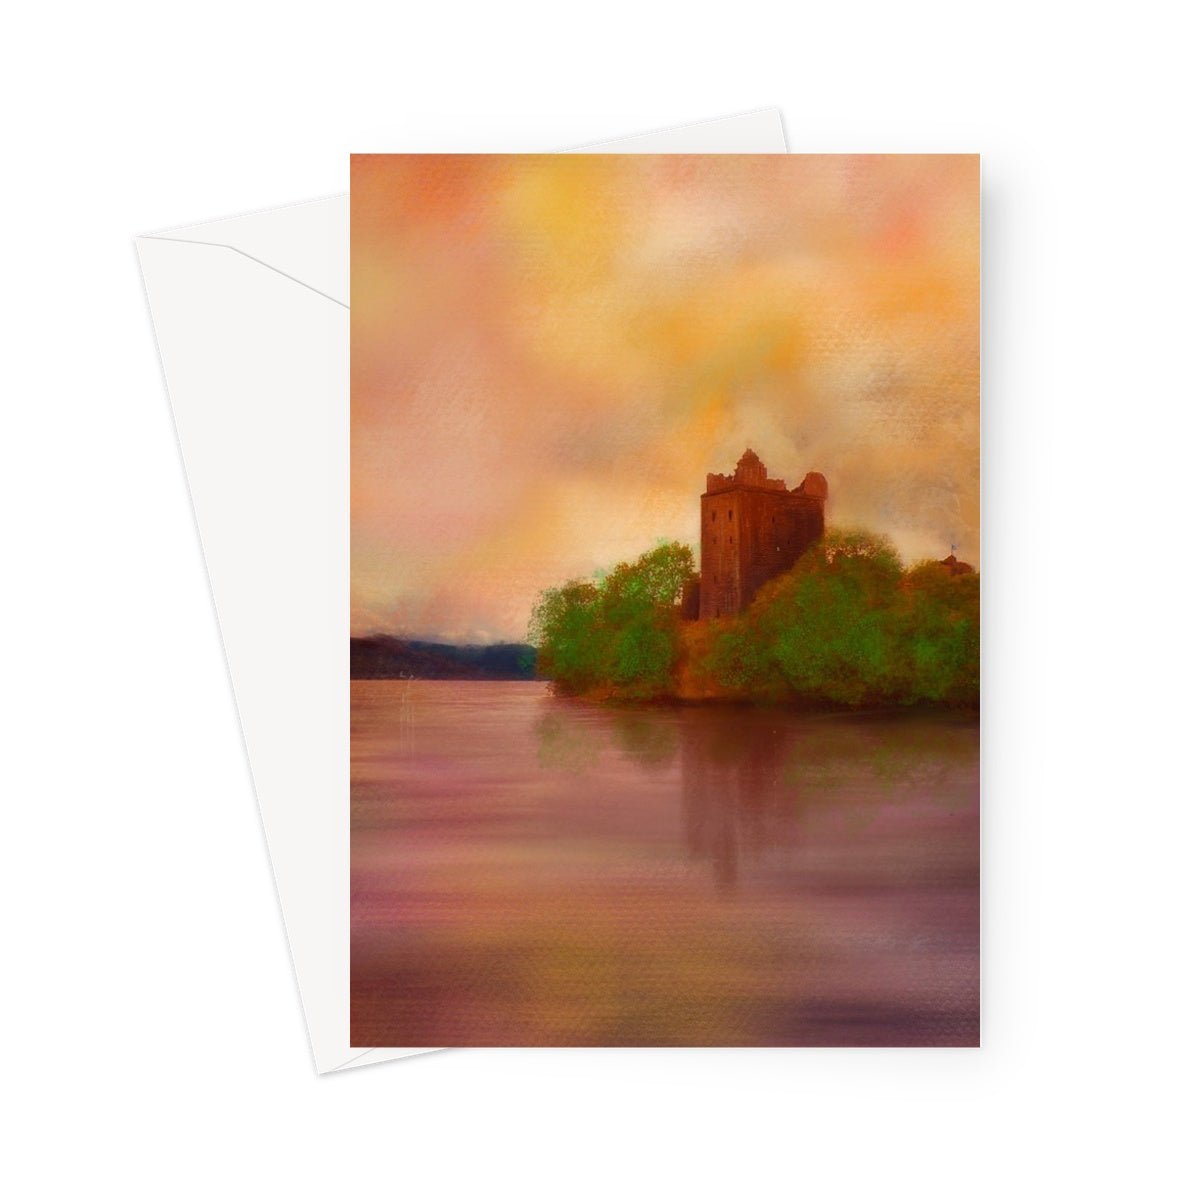 Urquhart Castle Art Gifts Greeting Card-Greetings Cards-Historic & Iconic Scotland Art Gallery-5"x7"-10 Cards-Paintings, Prints, Homeware, Art Gifts From Scotland By Scottish Artist Kevin Hunter